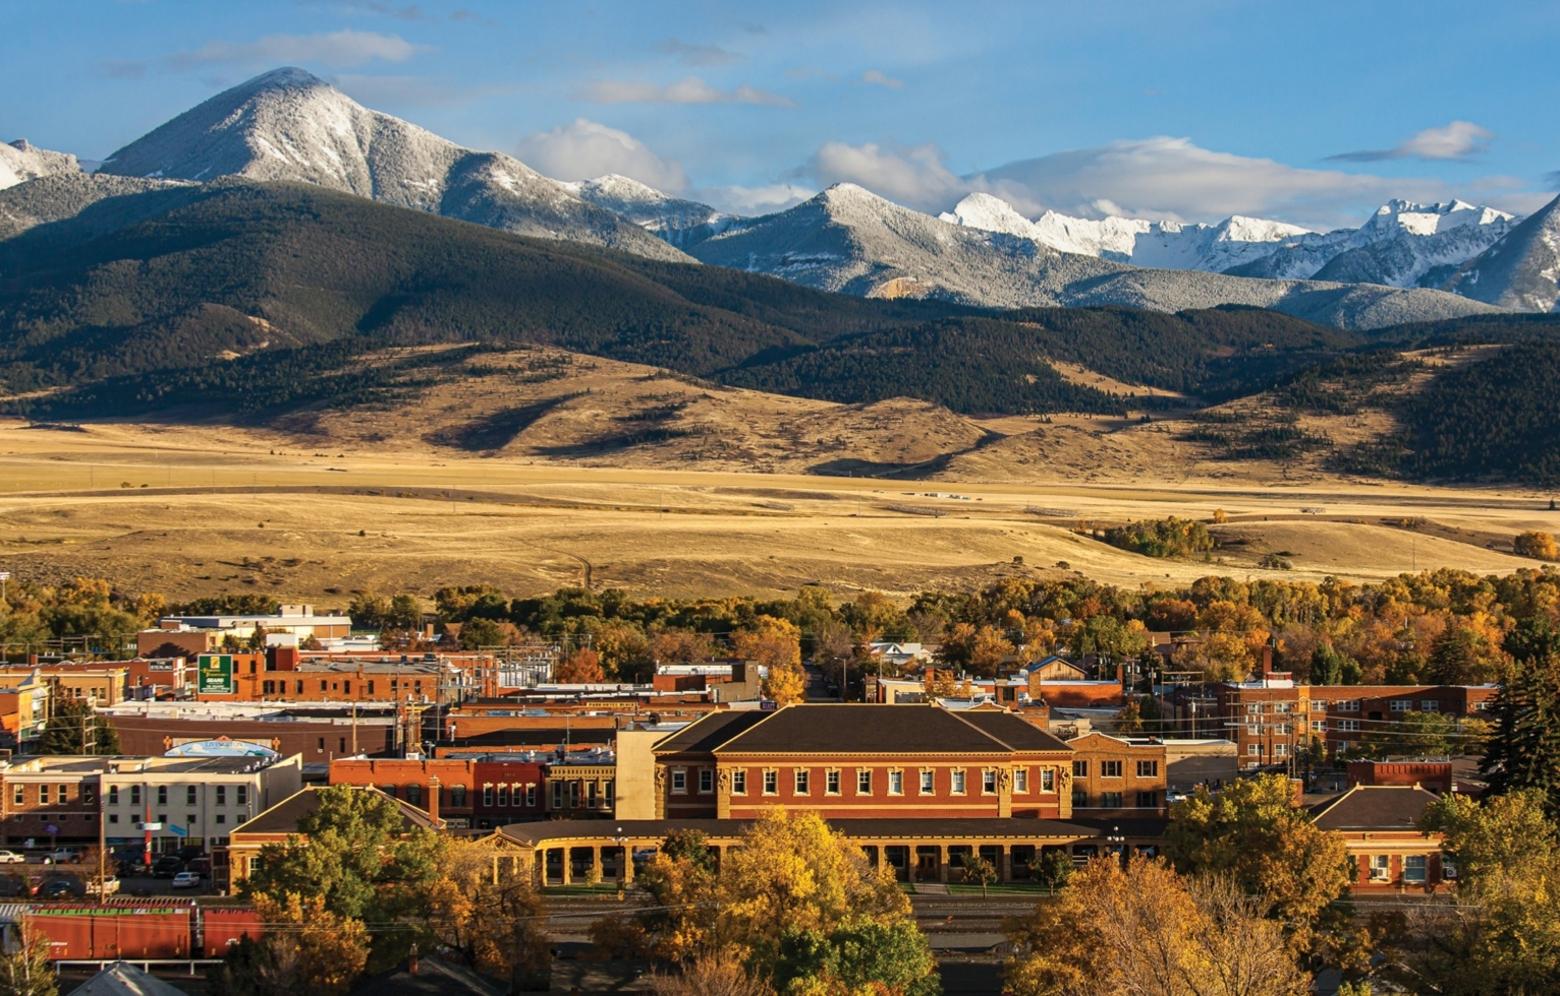 Outside the boundary of Livingston, Montana, undeveloped lands between town and the Absaroka Mountains provide a crucial apron for migratory wildlife and cement a deeper aesthetic connection to place for human denizens. Photo courtesy FutureWest (www.future-west.org)